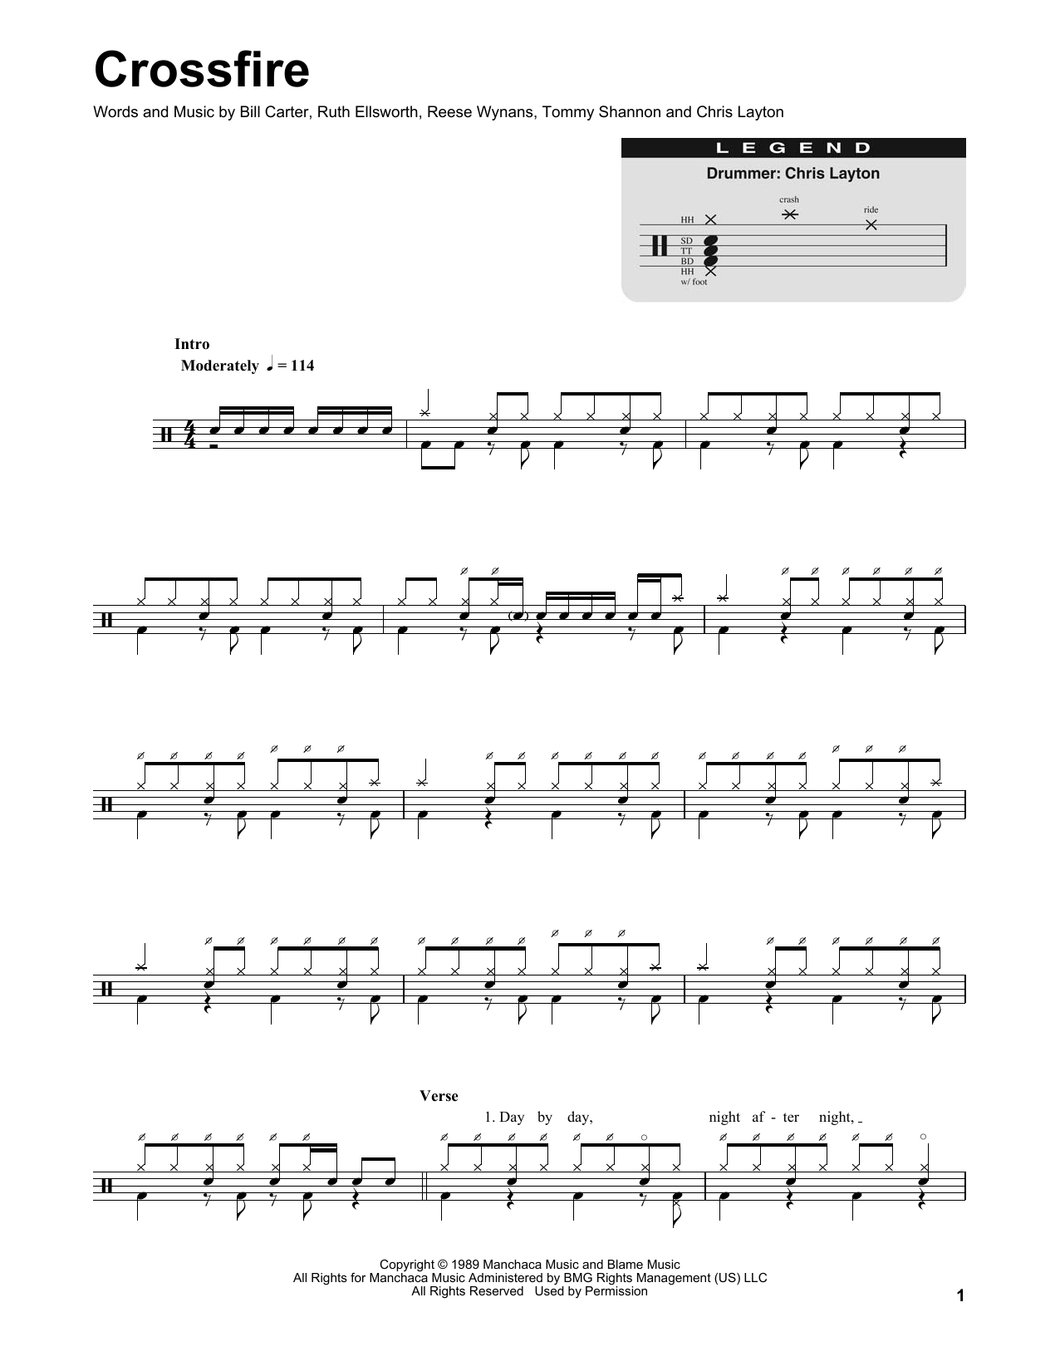 Crossfire - Stevie Ray Vaughan & Double Trouble - Full Drum Transcription / Drum Sheet Music - SheetMusicDirect DT170264